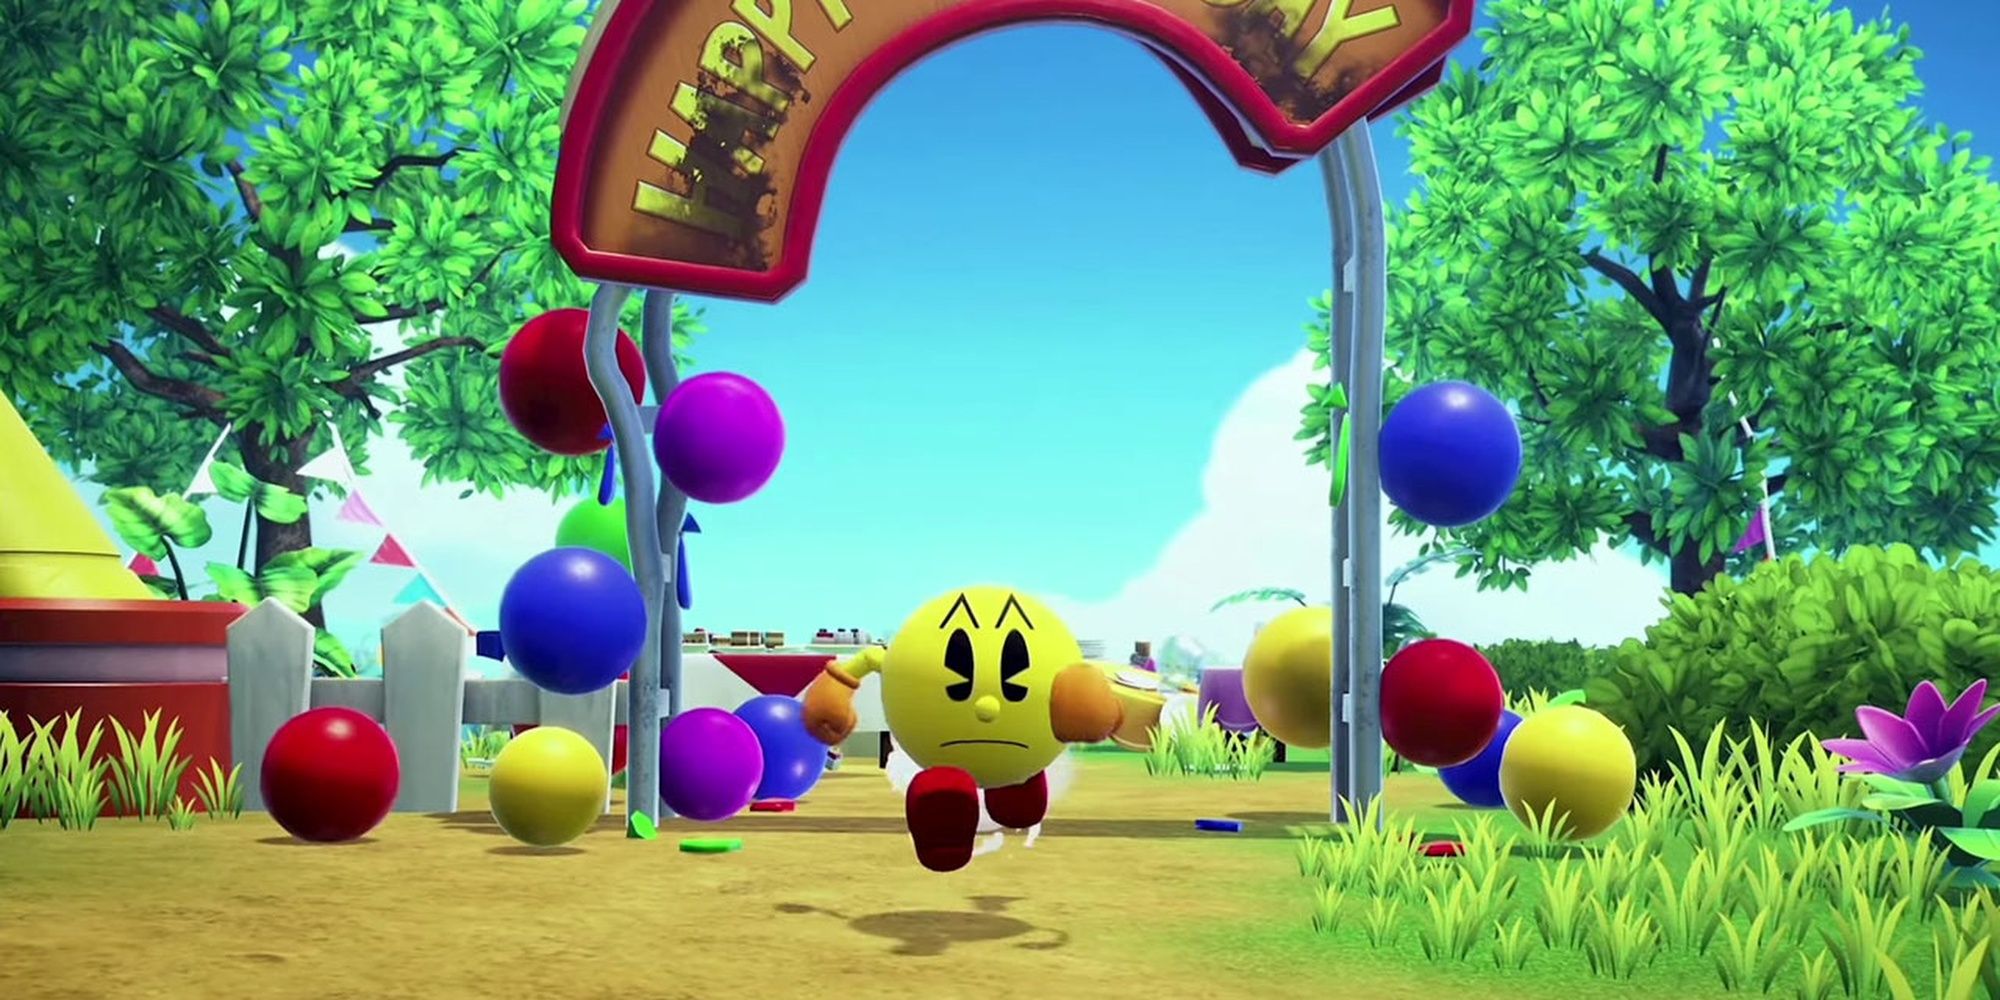 Pac-Man leaving his birthday party to go after his kidnaped family in Pac-Man World Re-Pac